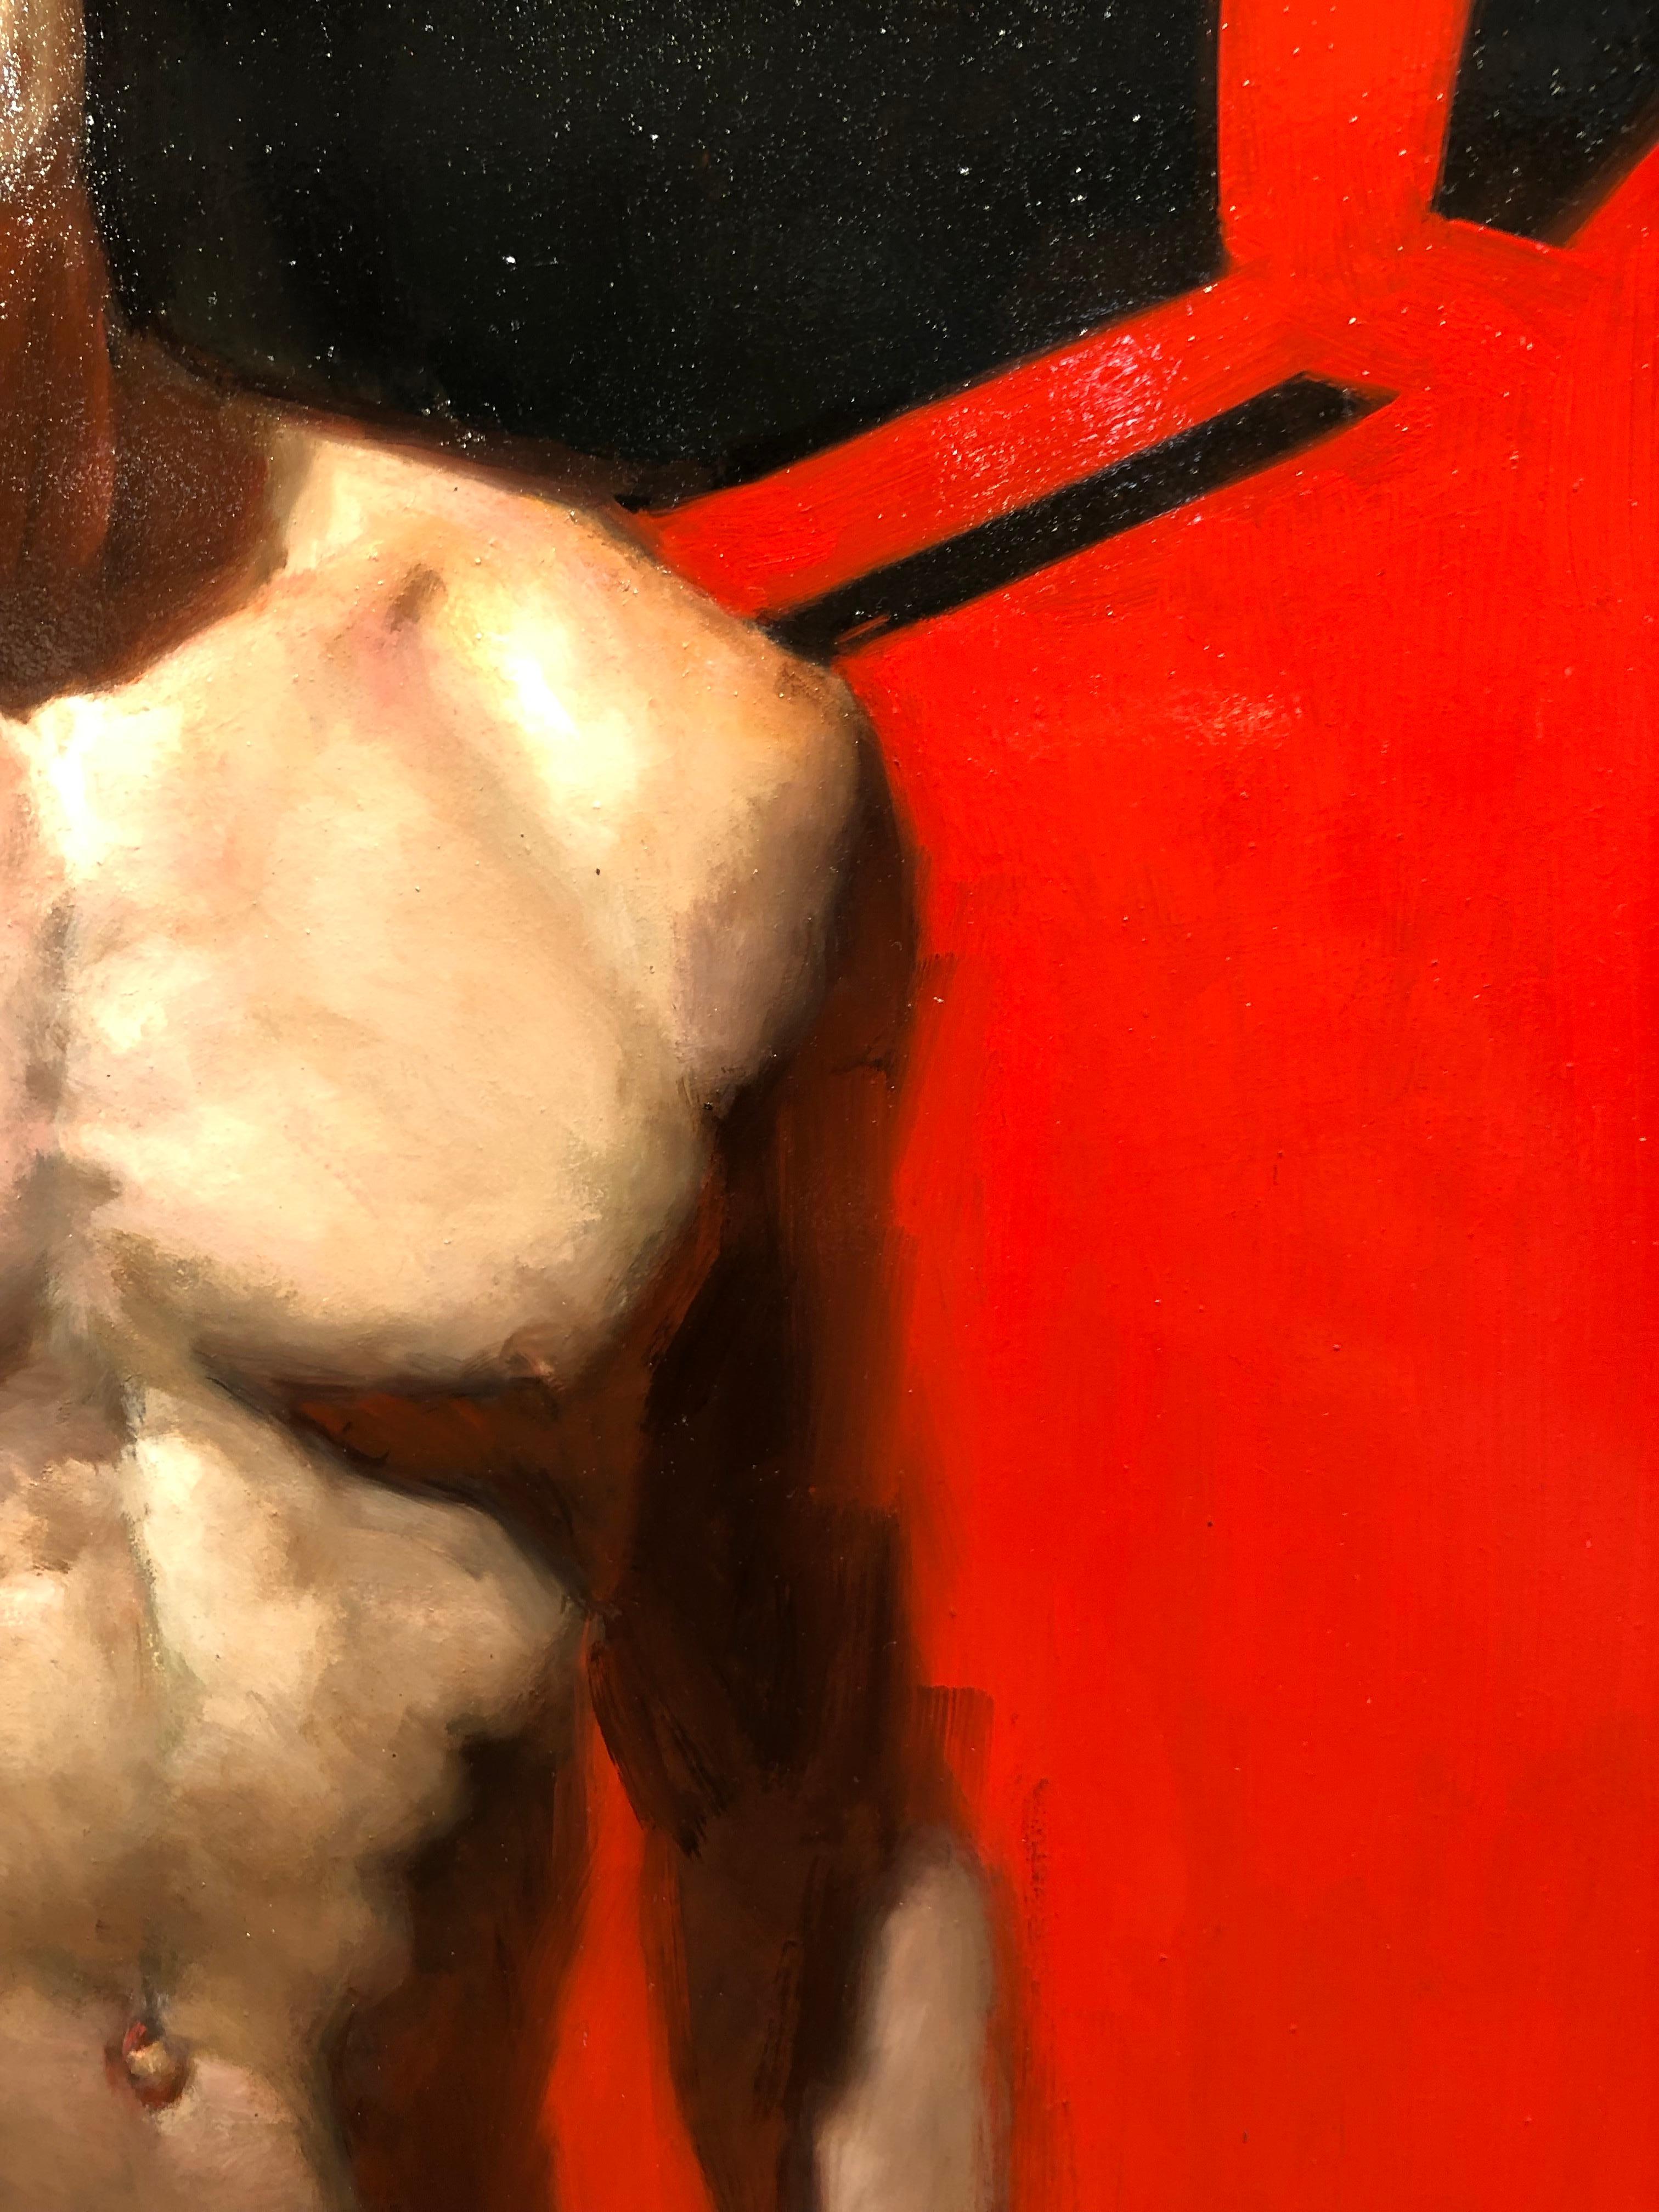 7B - Red Background with Shirtless Male and Black Seven, Oil on Panel Painting 1